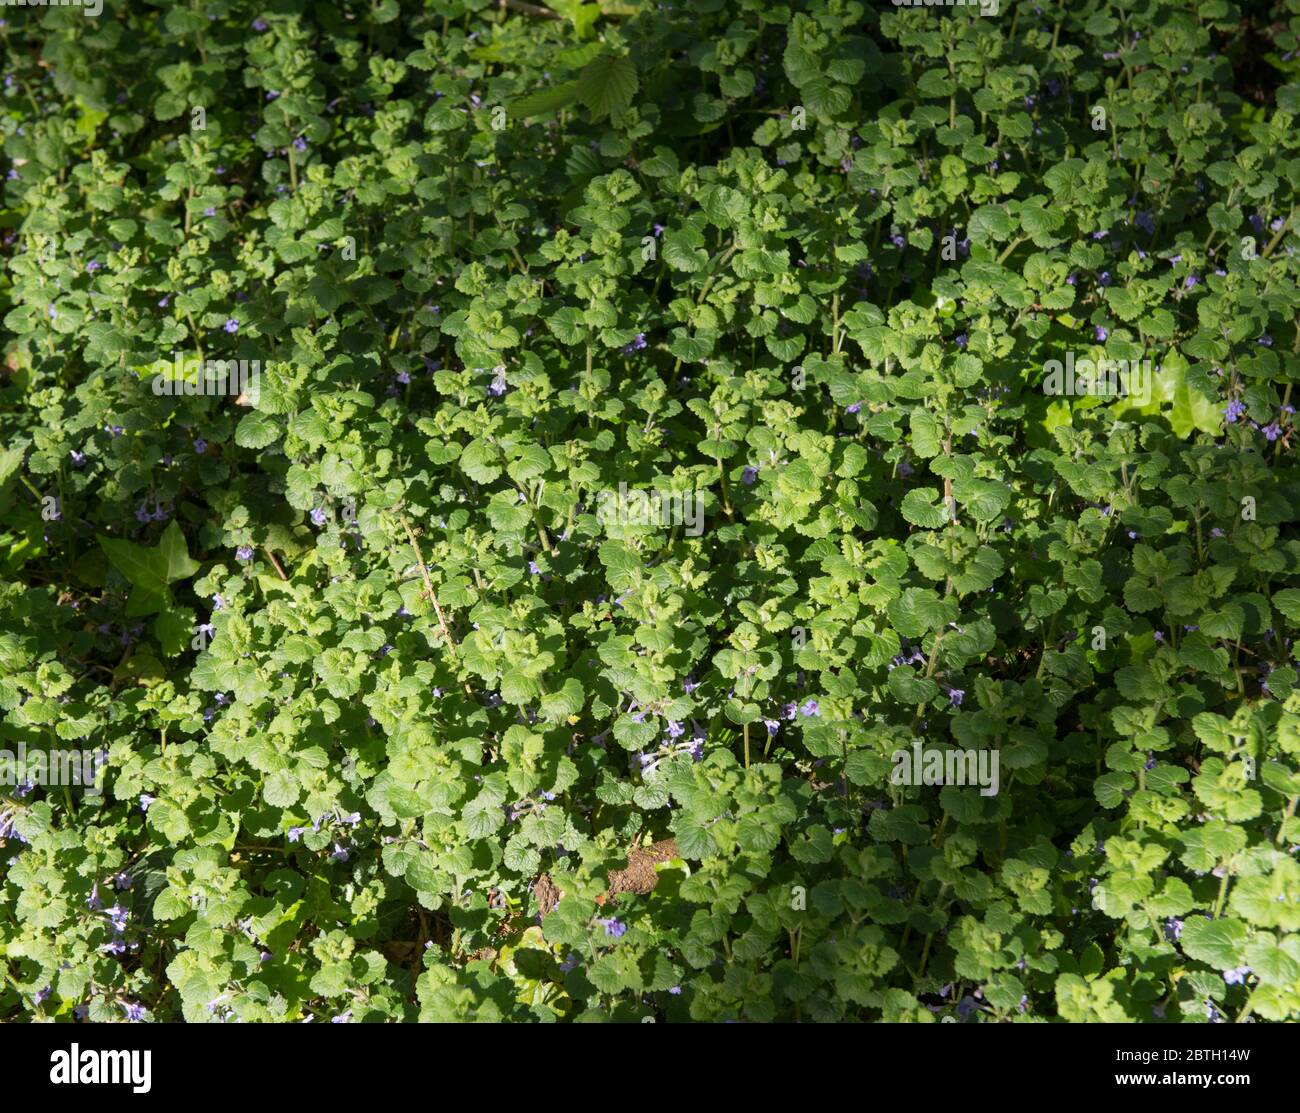 Spring Flowering of the Clump Forming Ground Ivy Plant (Glechoma hederacea) Growing on the Floor of a Forest in Rural Devon, England, UK Stock Photo